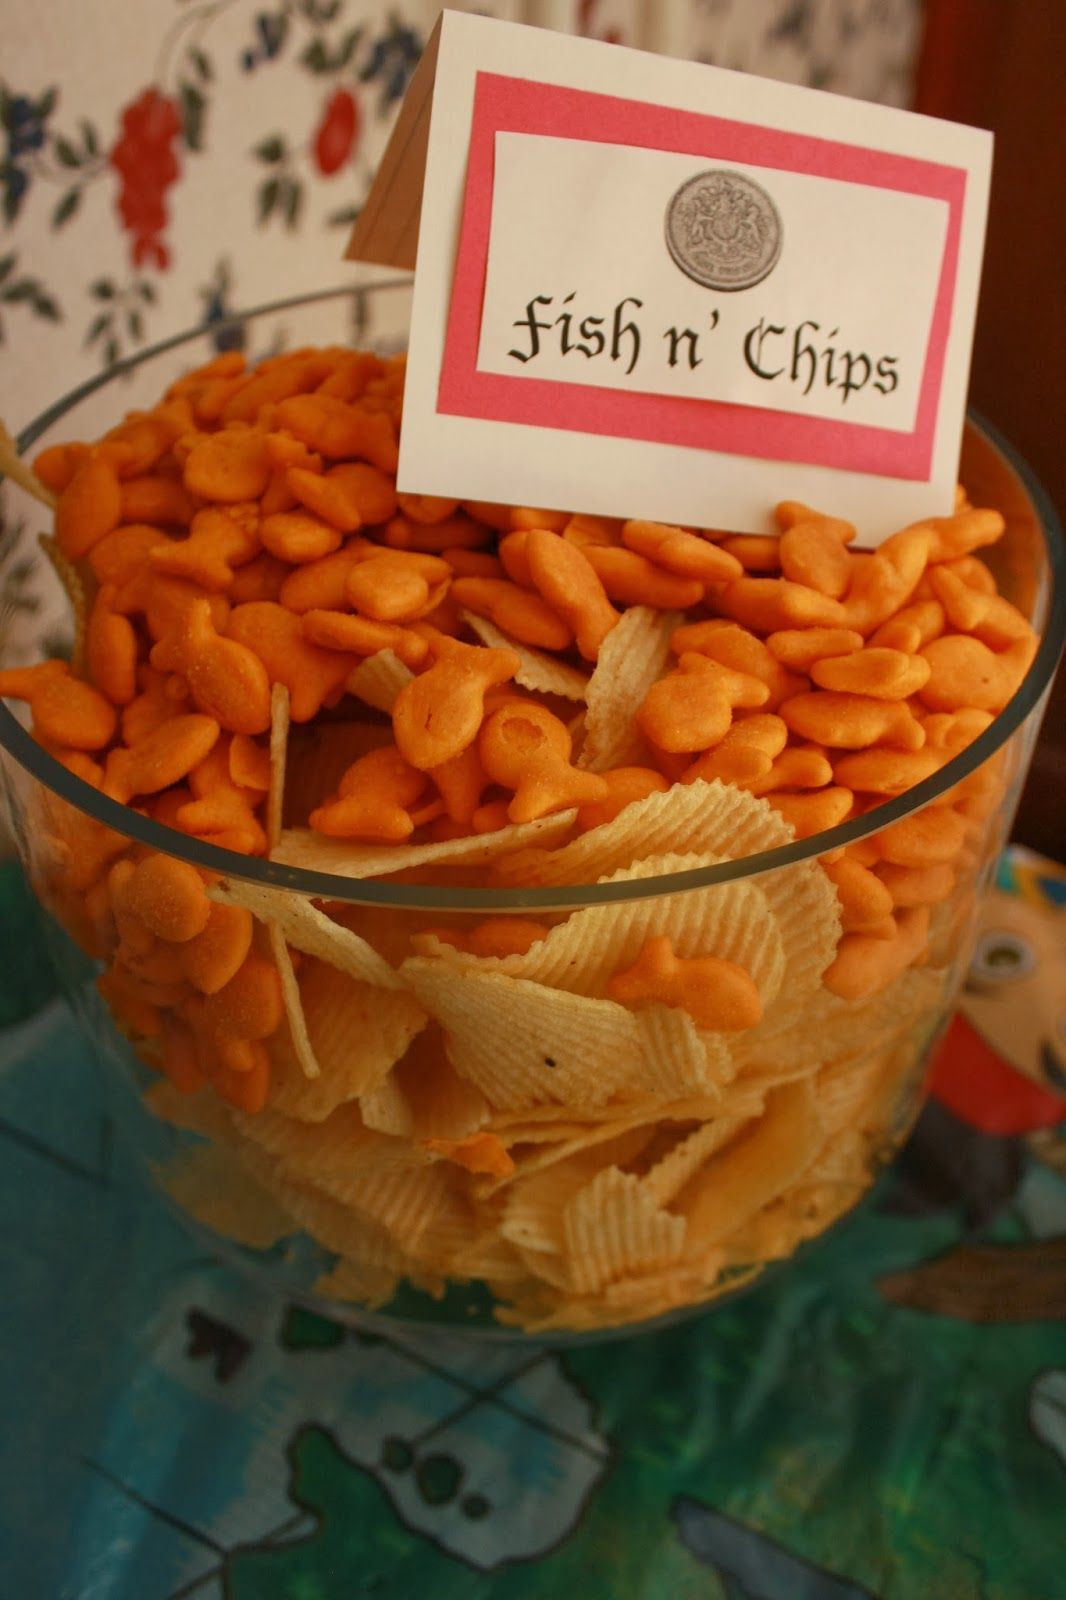 Beach Party Potluck Food Ideas
 I m bringing this to the next potluck